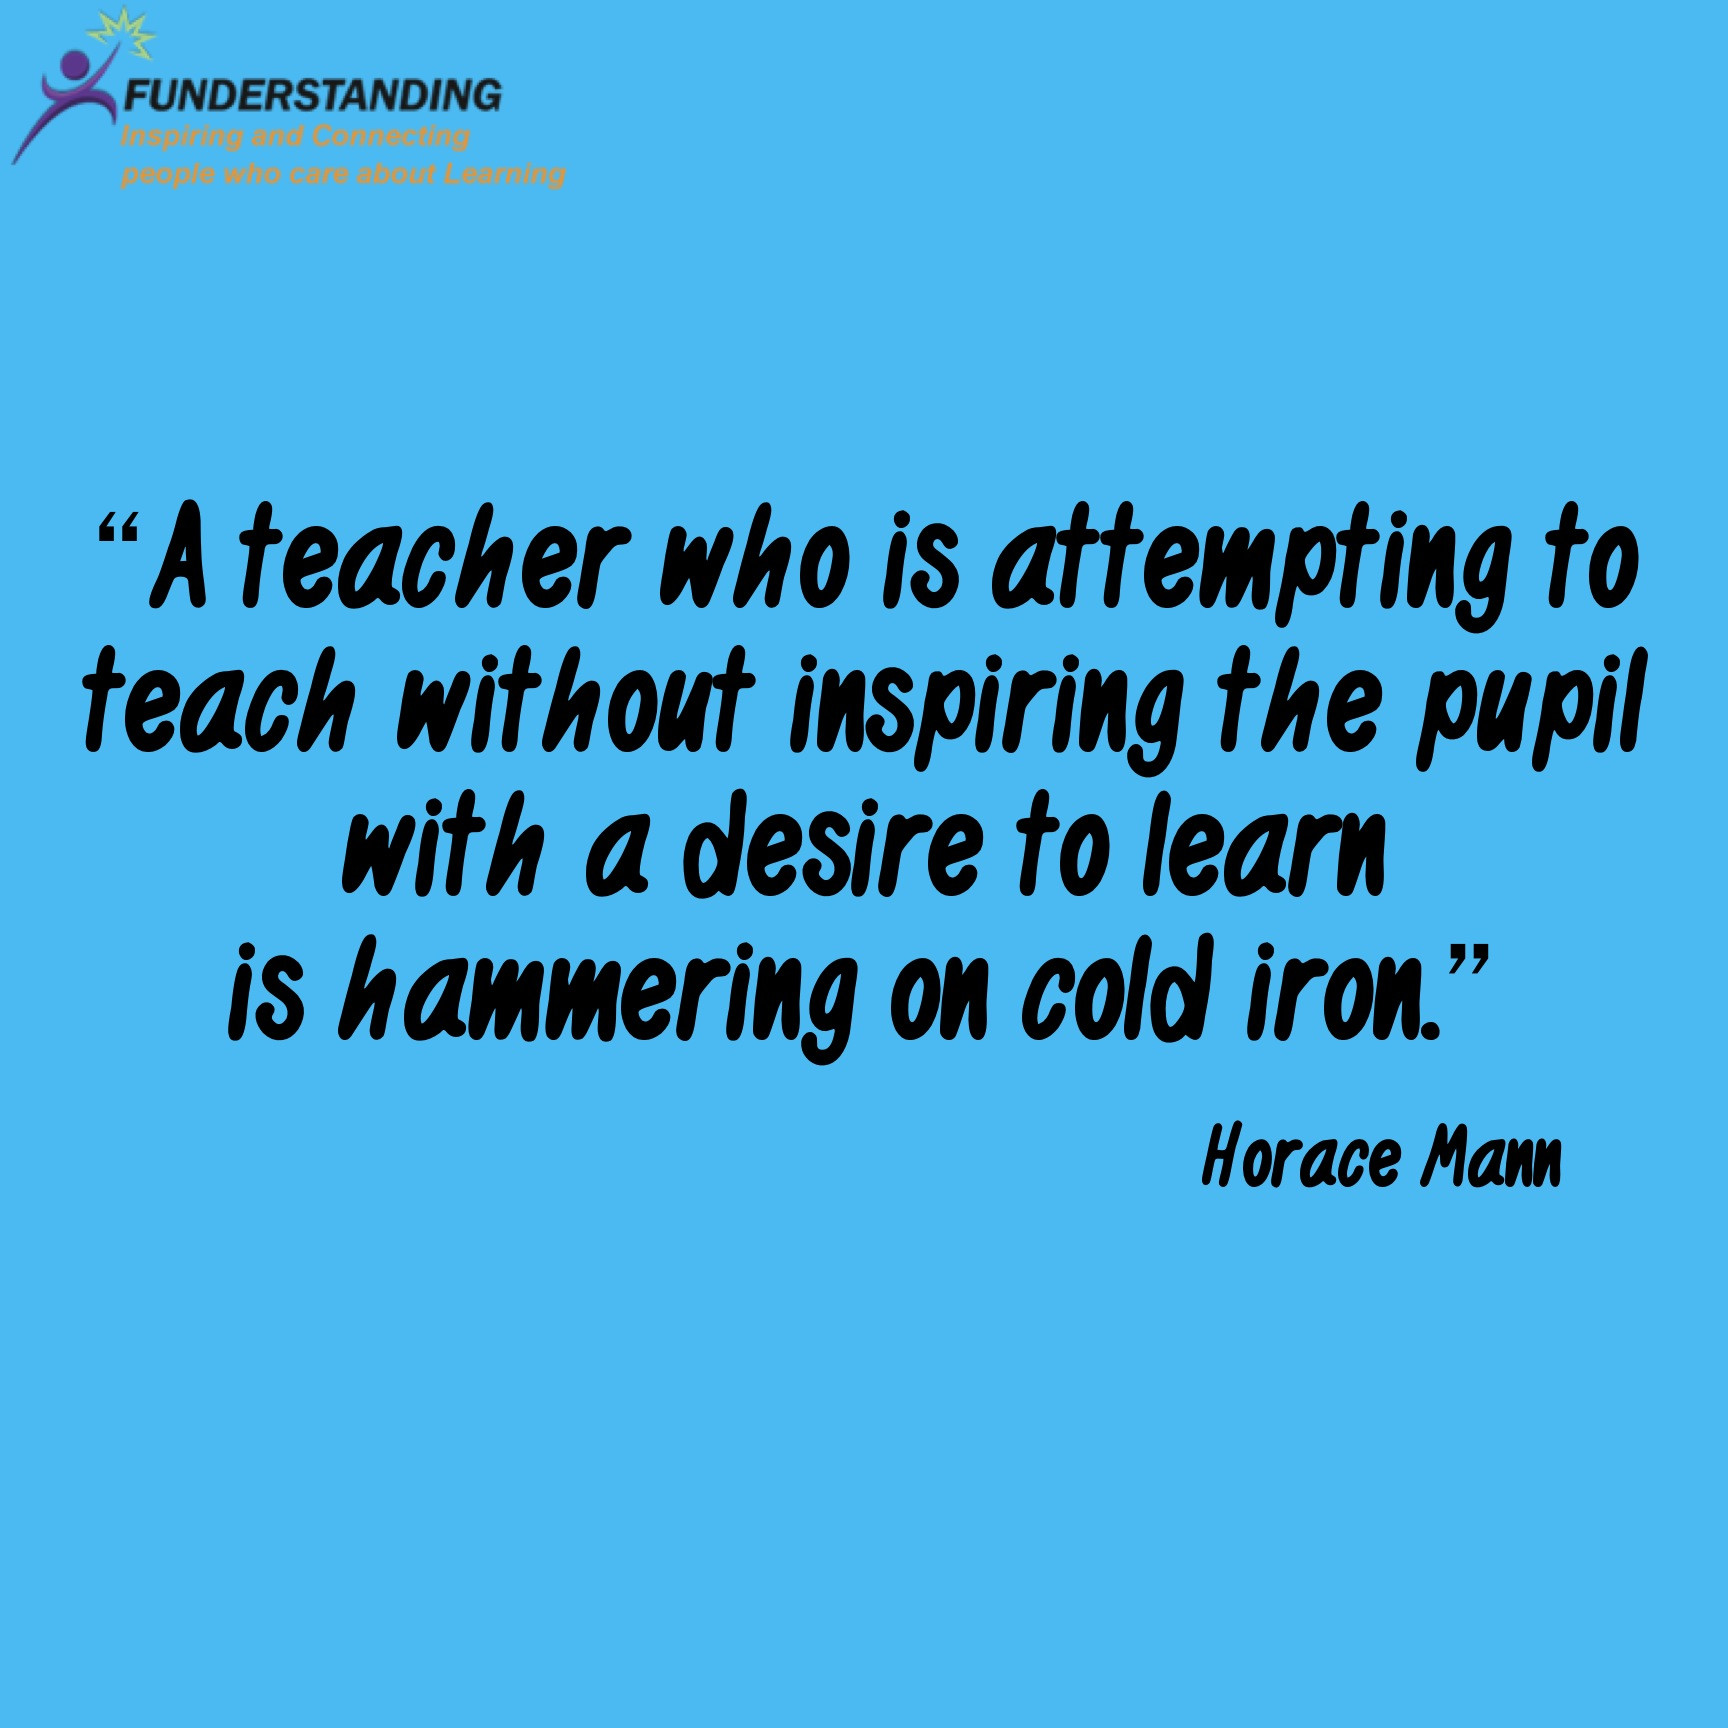 Education Quotes For Students
 Motivational Quotes For Students QuotesGram